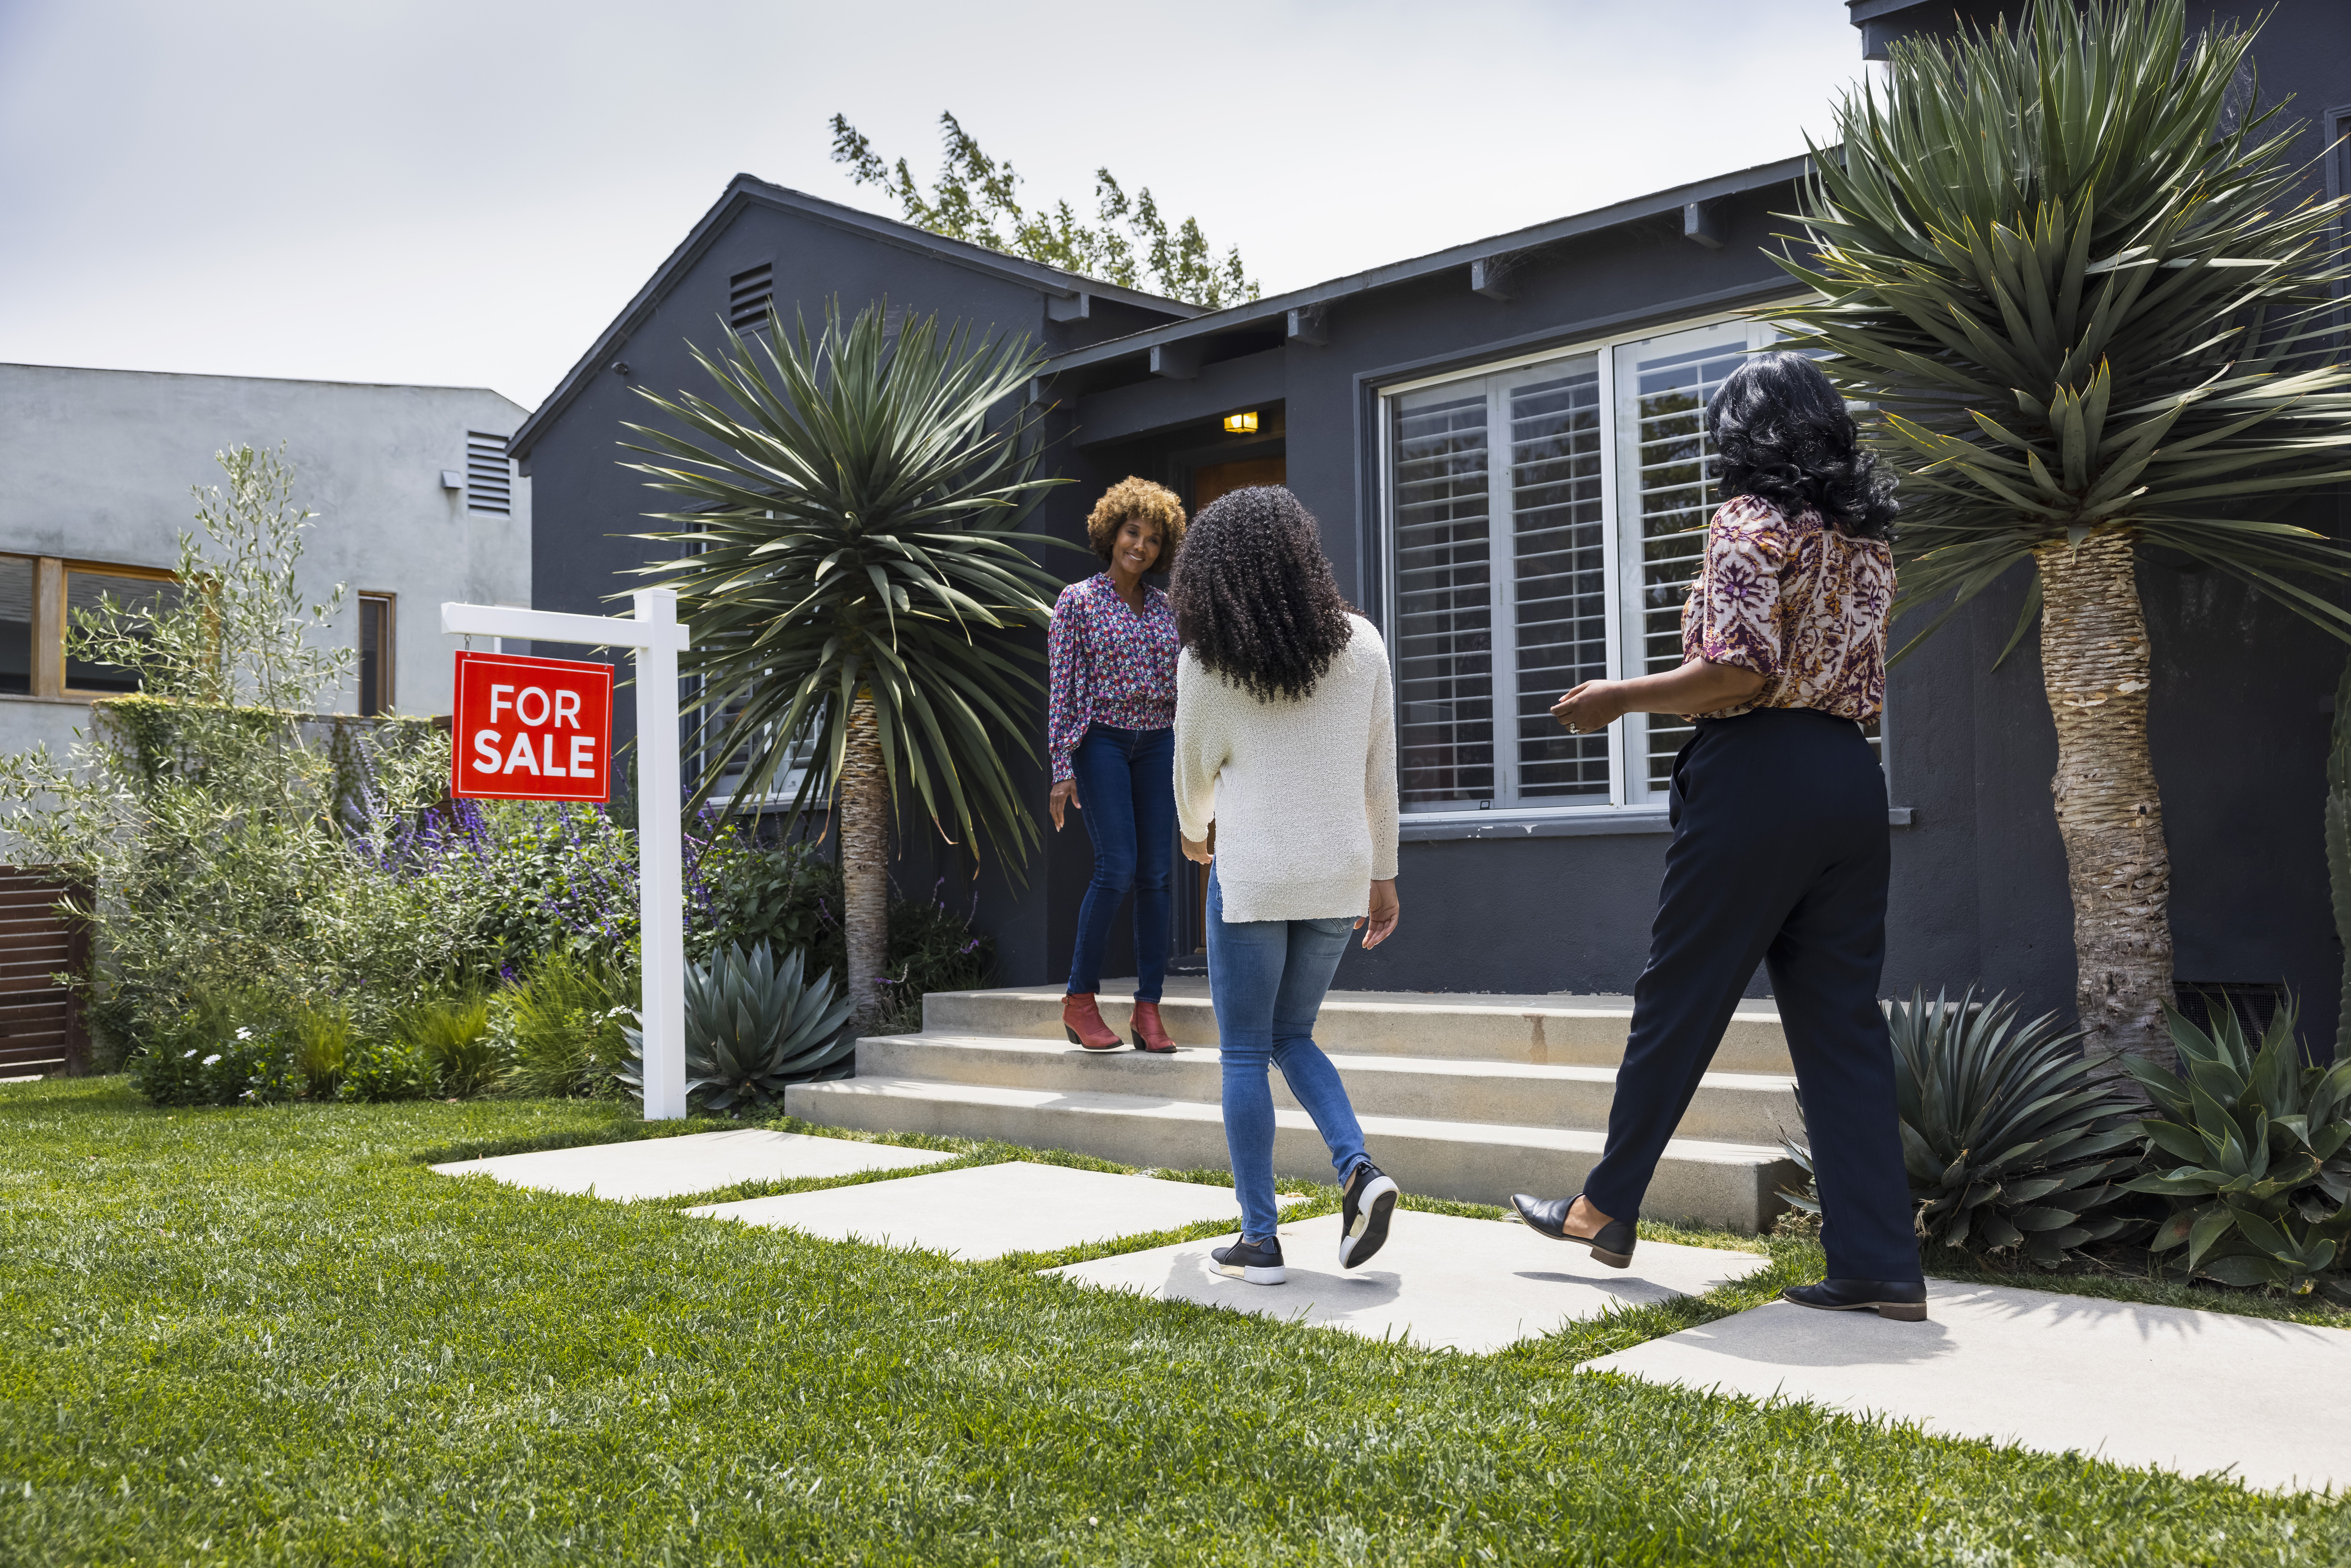 More homebuyers back out of deals as mortgage rates hit 23-year high